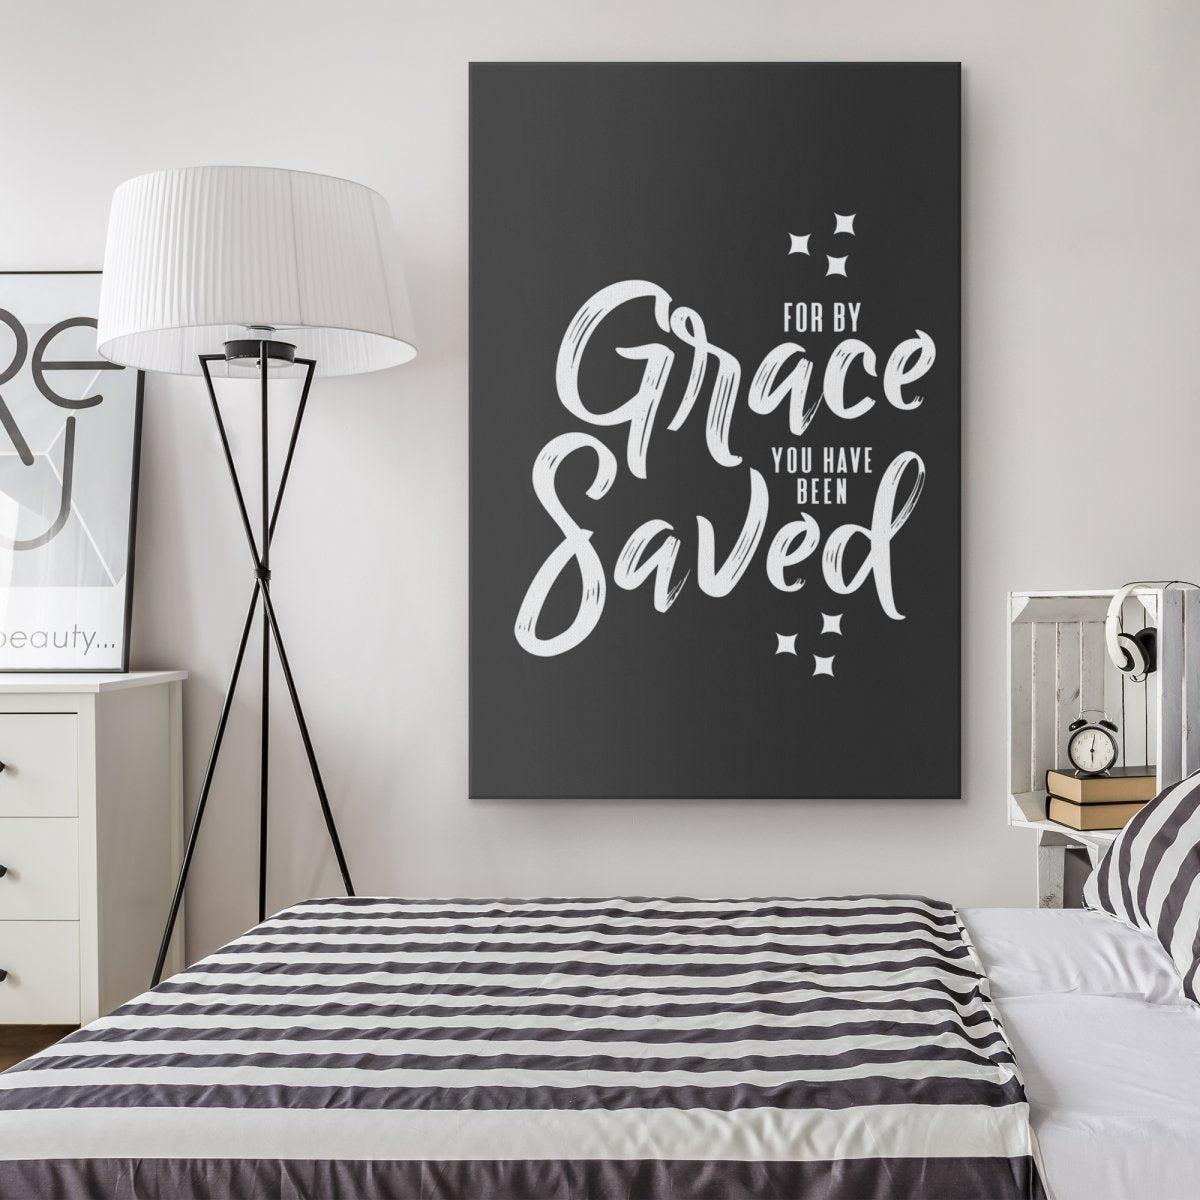 For by Grace (Gallery Canvas) - SDG Clothing